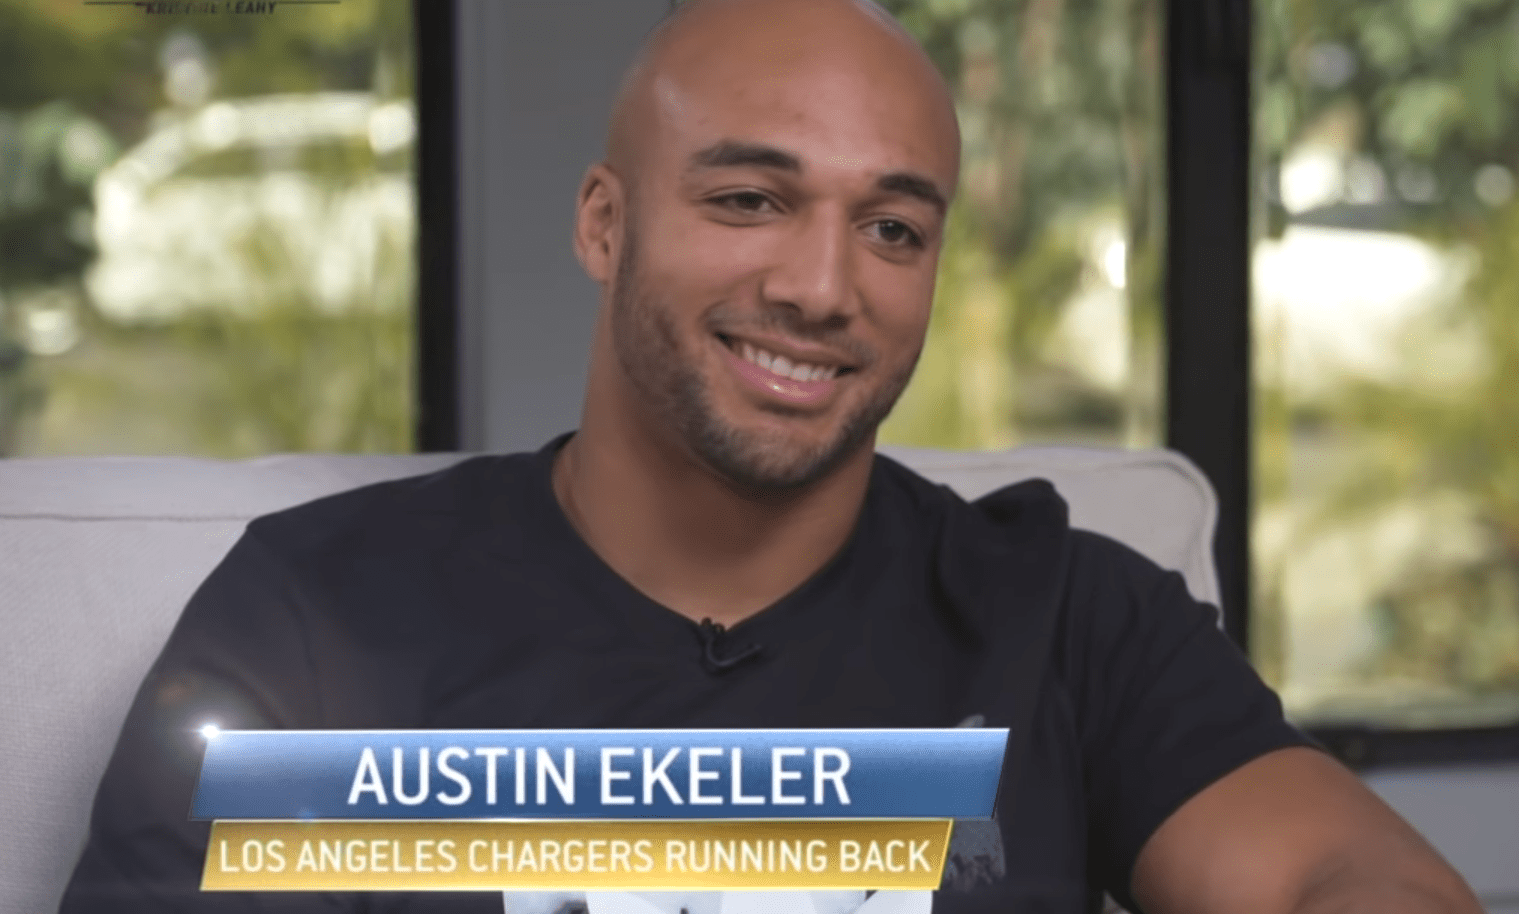 Austin Ekeler talks about Melvin Gordon's competitiveness in an Interview. | Photo: YouTube/Fair Game